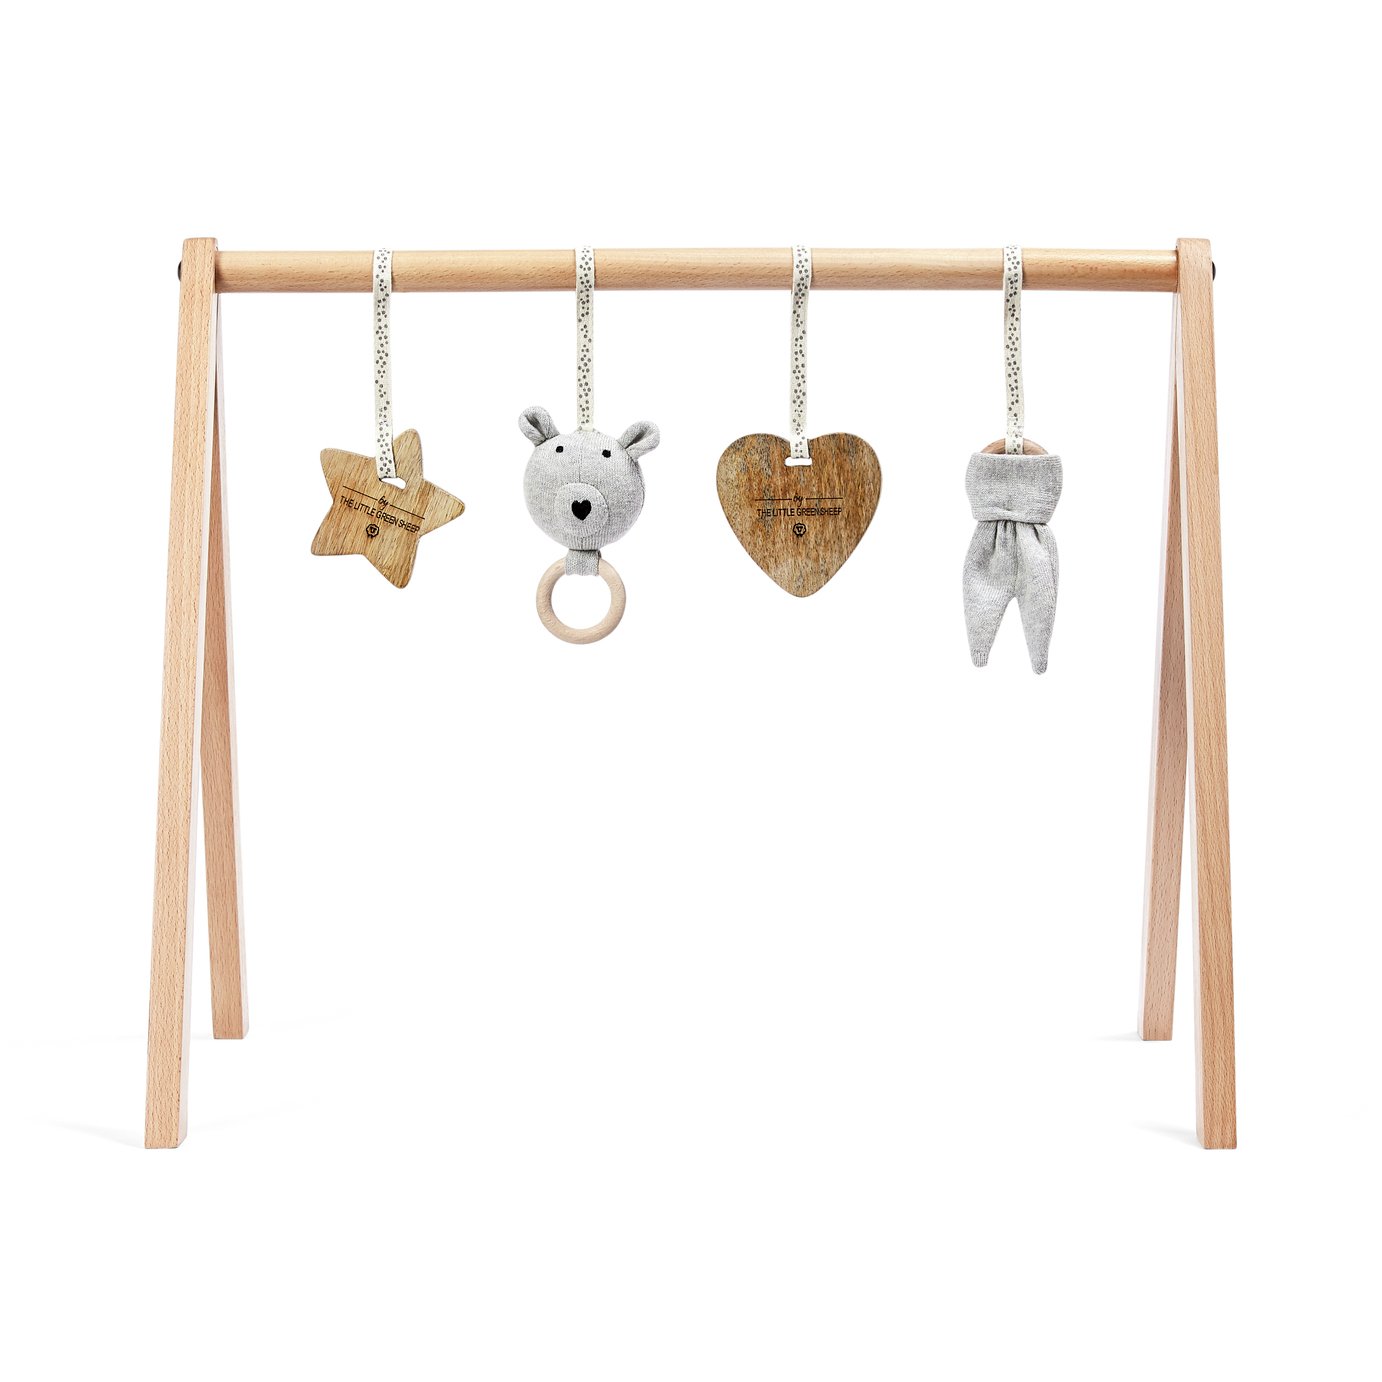 The Little Green Sheep Wooden Baby Play Gym & Charms Set Review